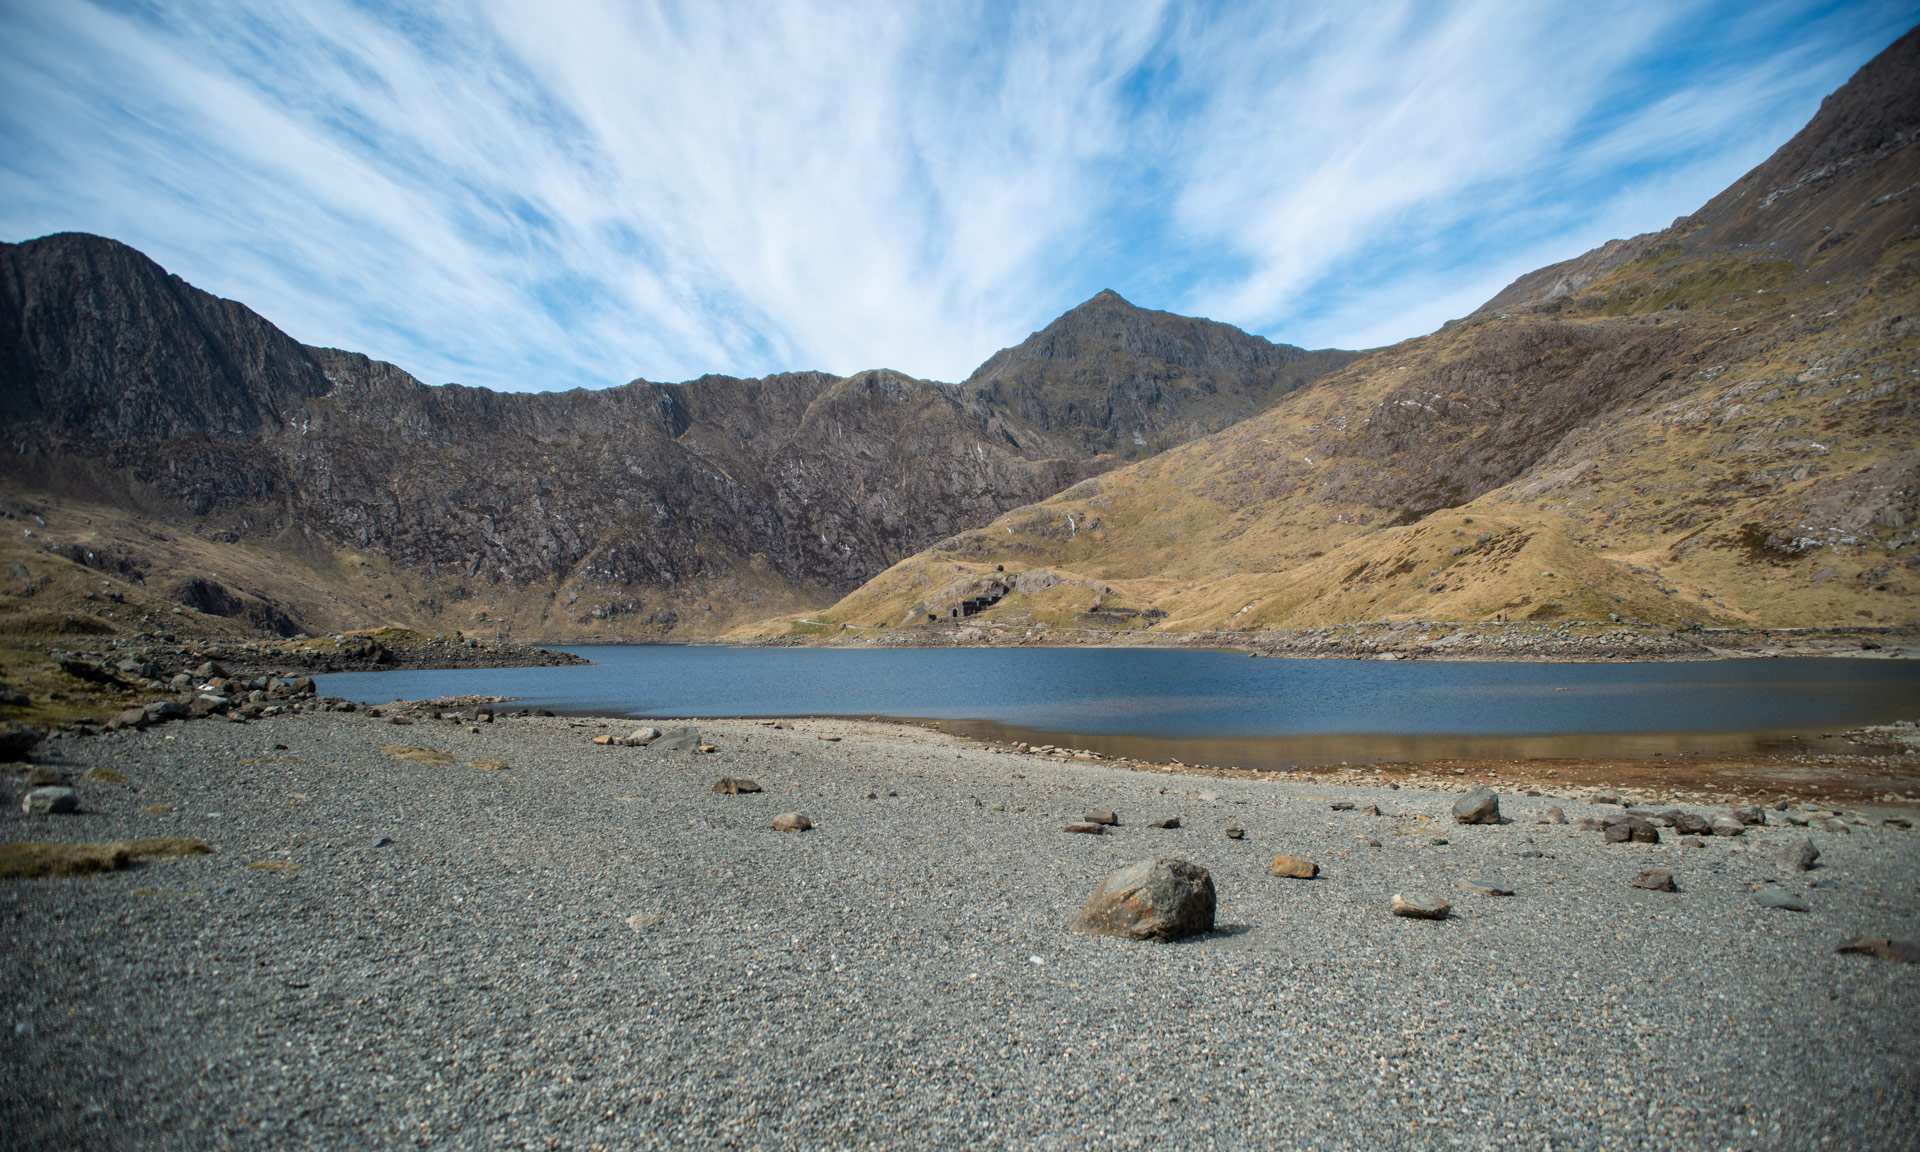 View of Snowdon summit from the shore of Llyn Llydaw